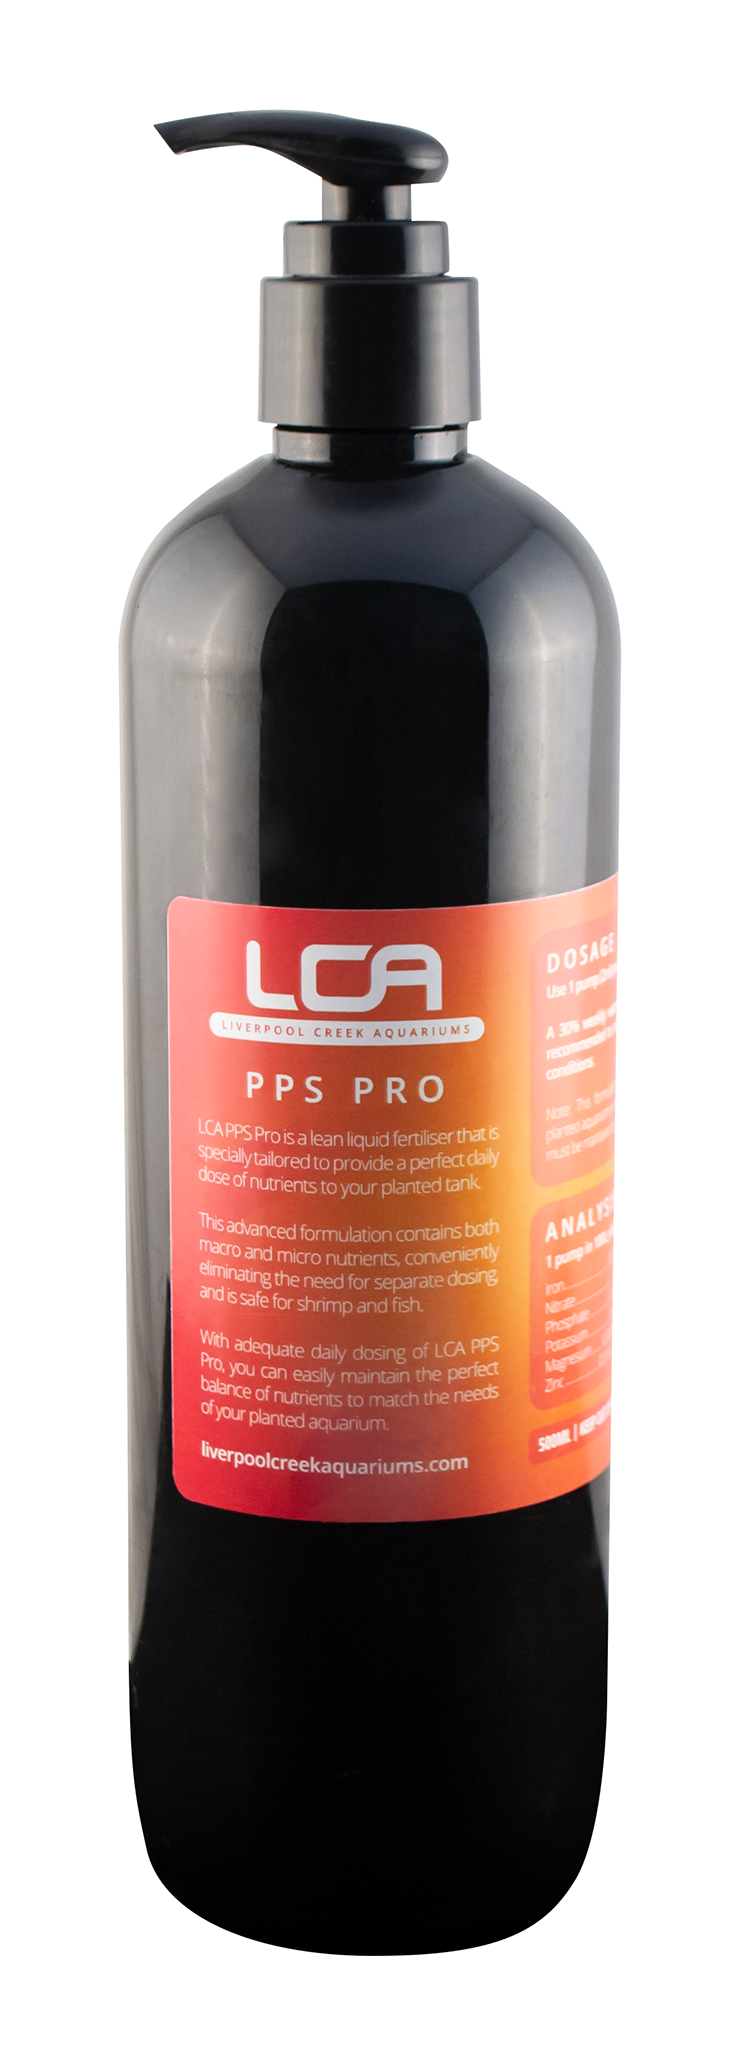 LCA PPS Pro